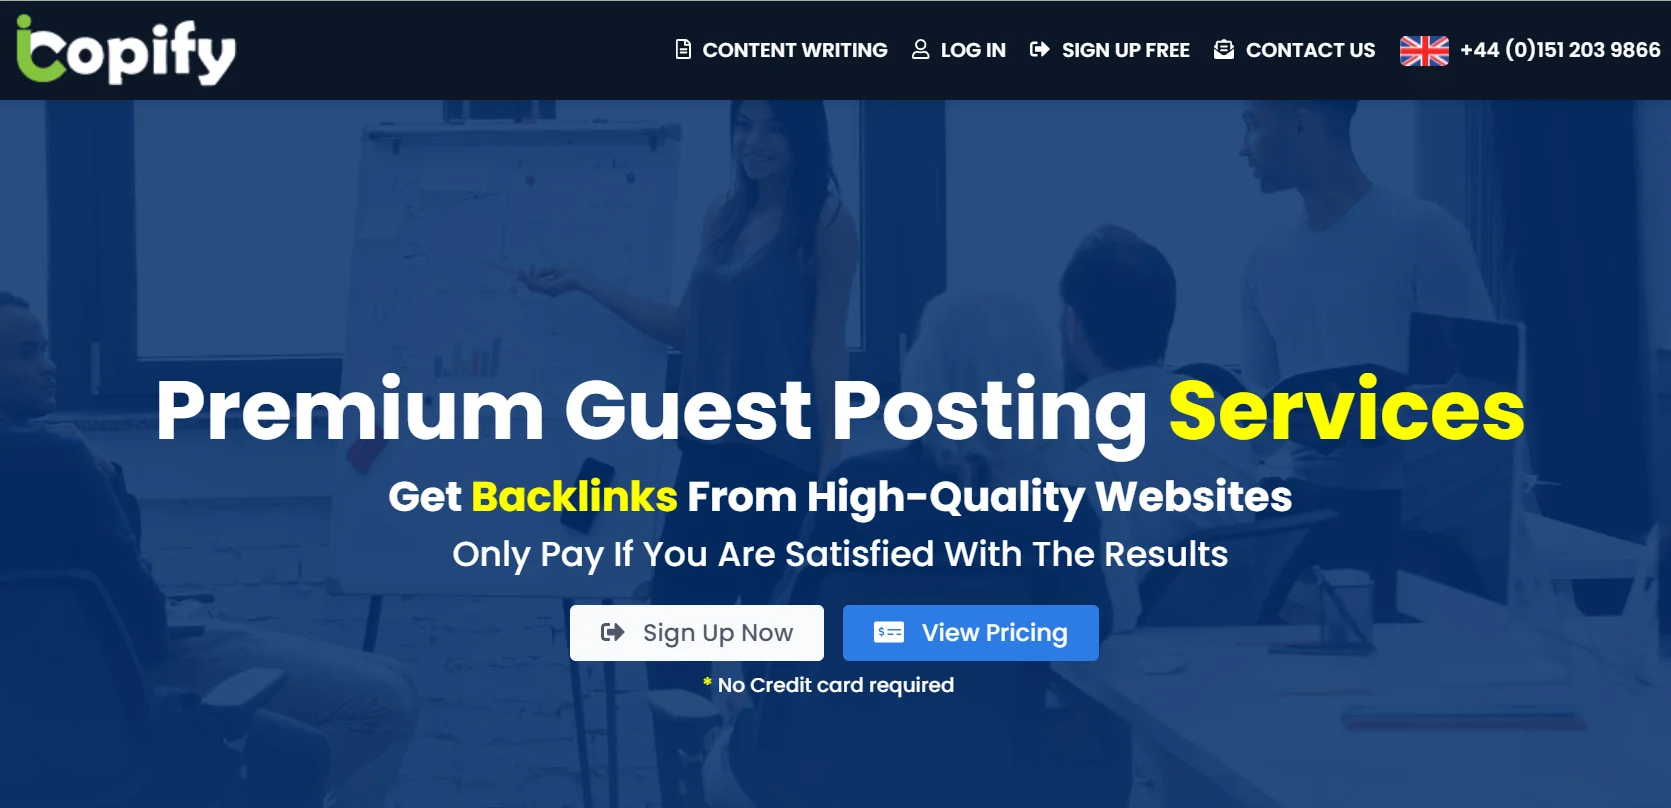 The other service for guest posting is iCopify